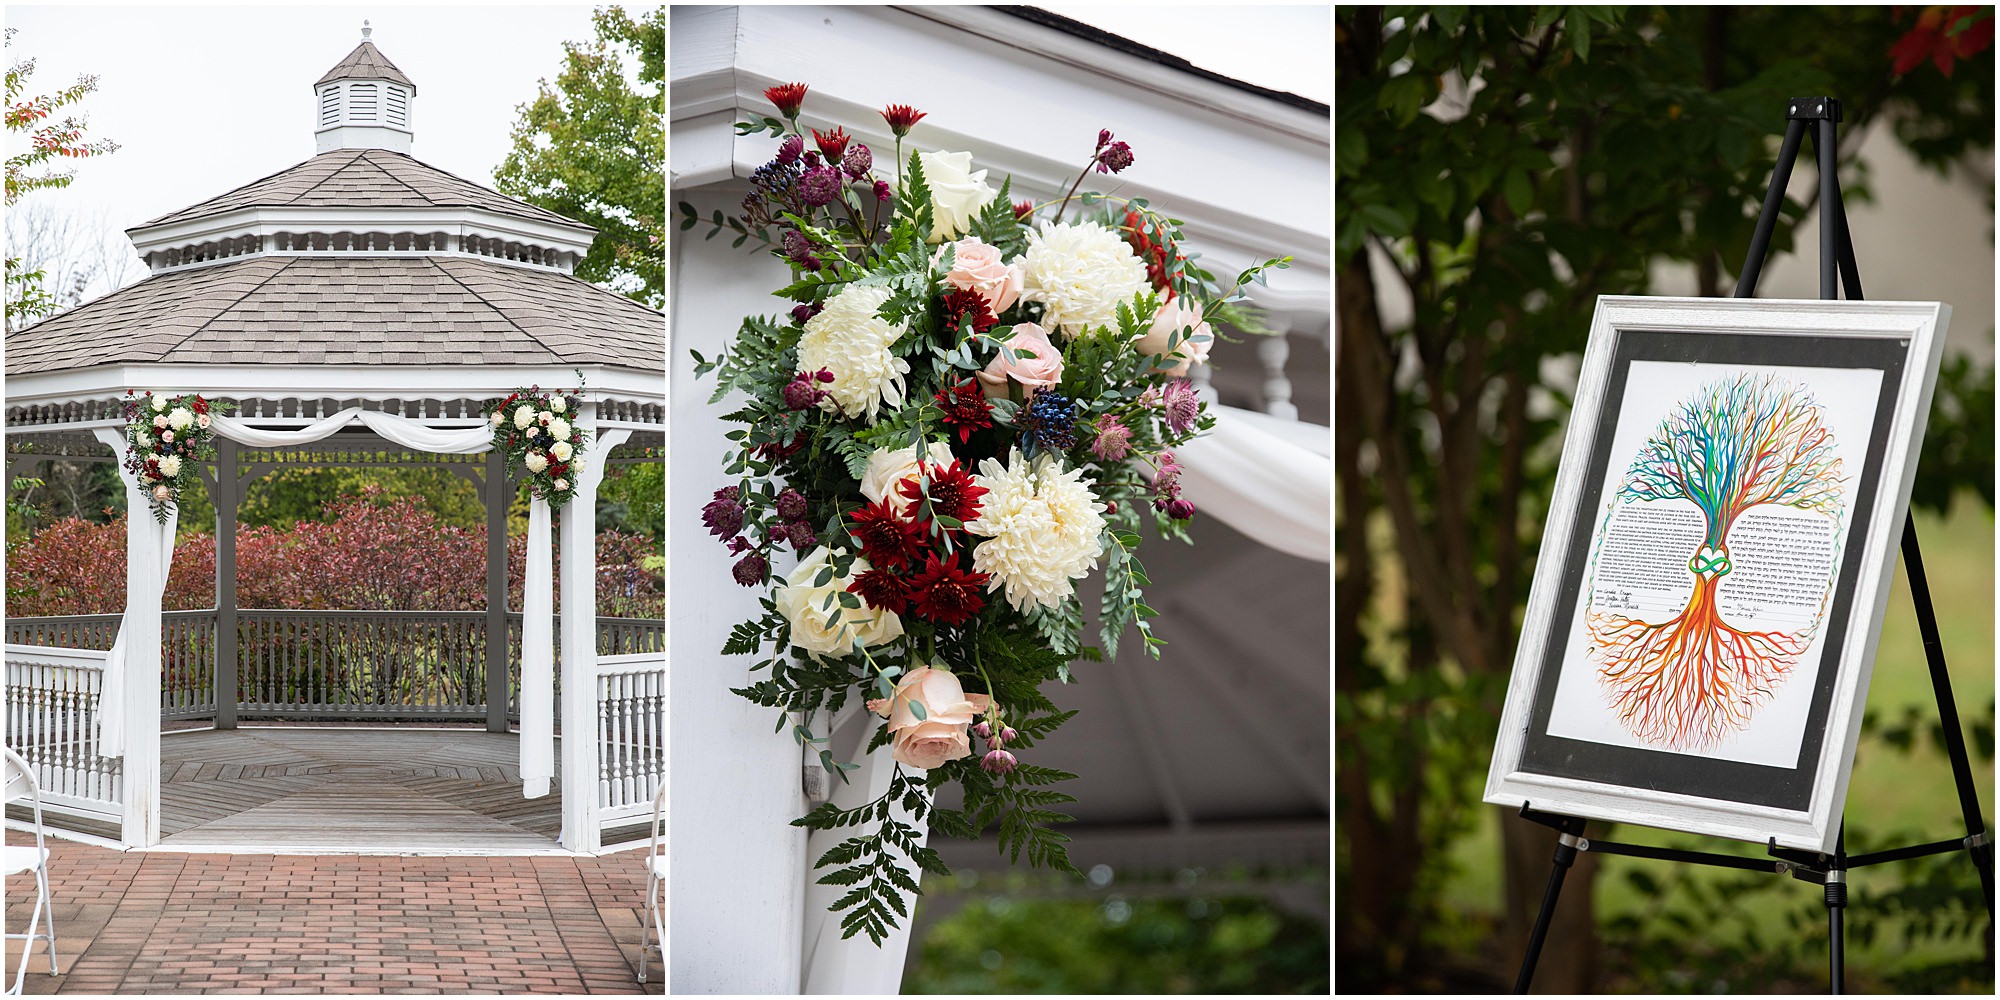 Details of ceremony at Wedding at Old York Country Club